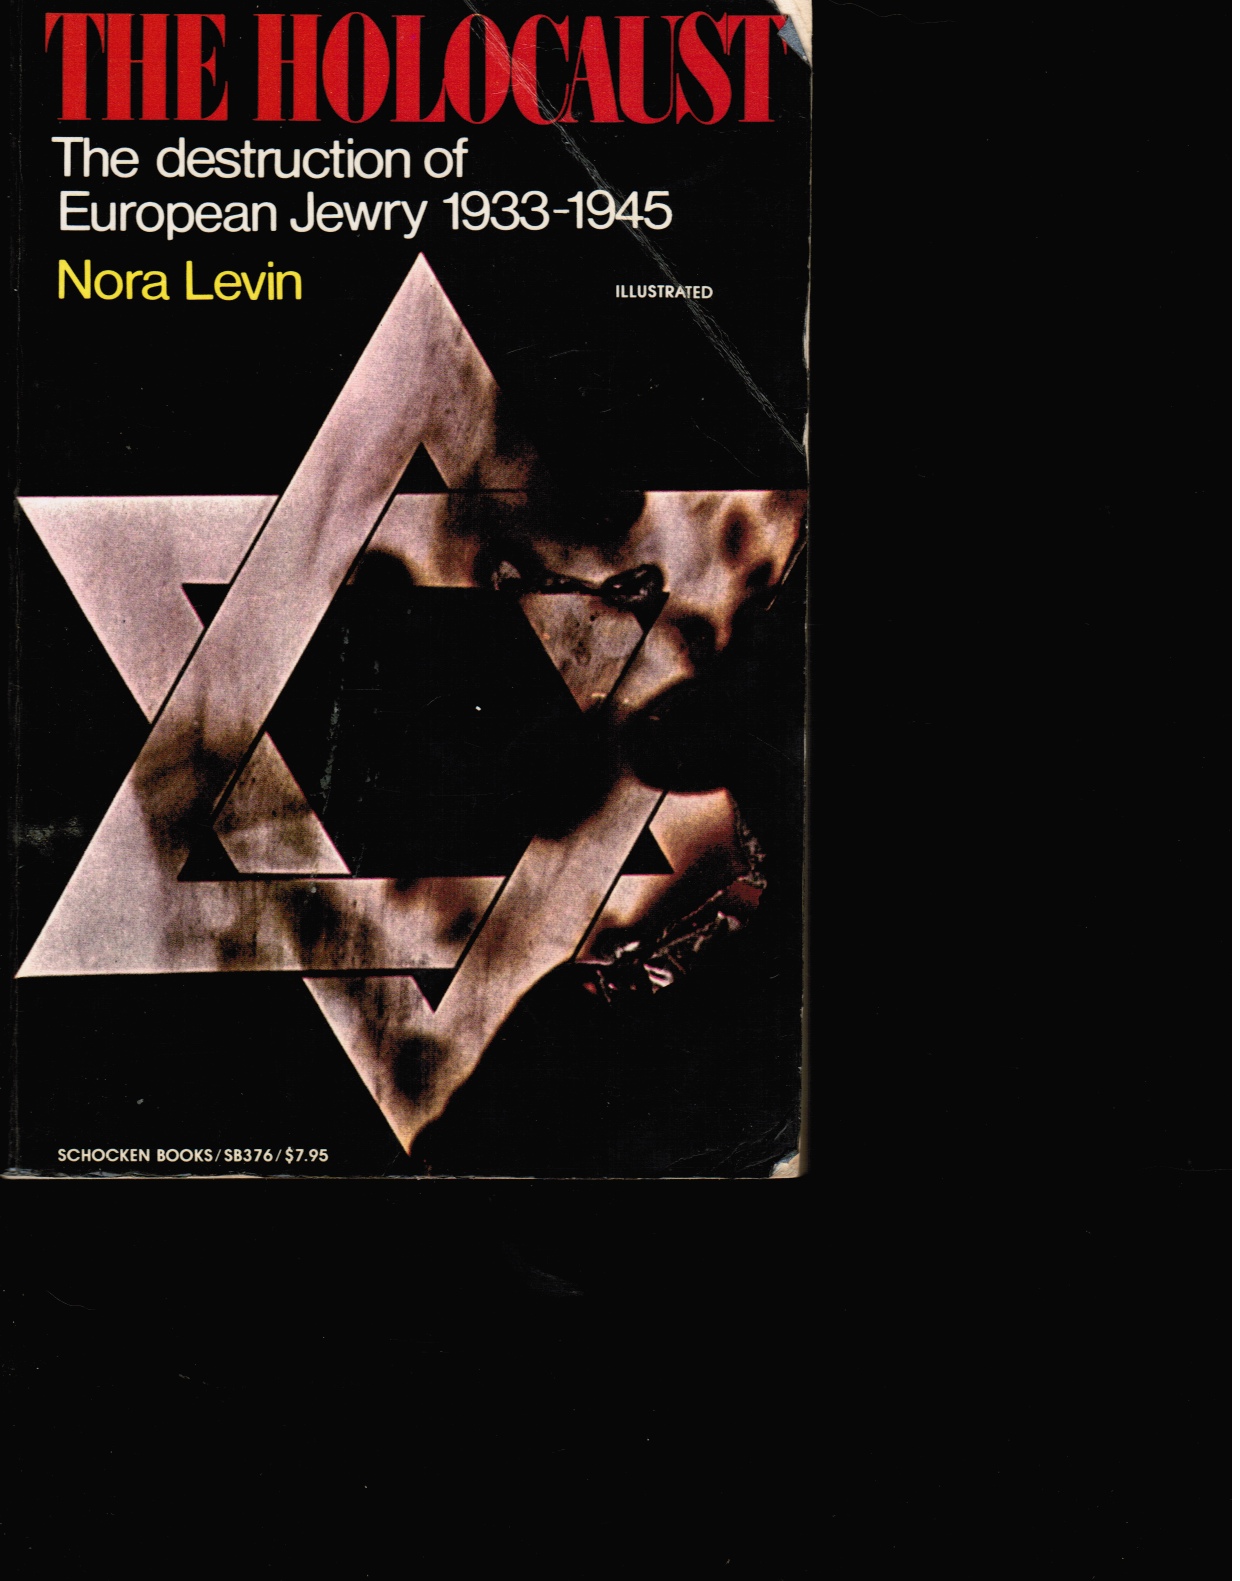 LEVIN, NORA - The Holocaust: The Destruction of European Jewry 1933-1945